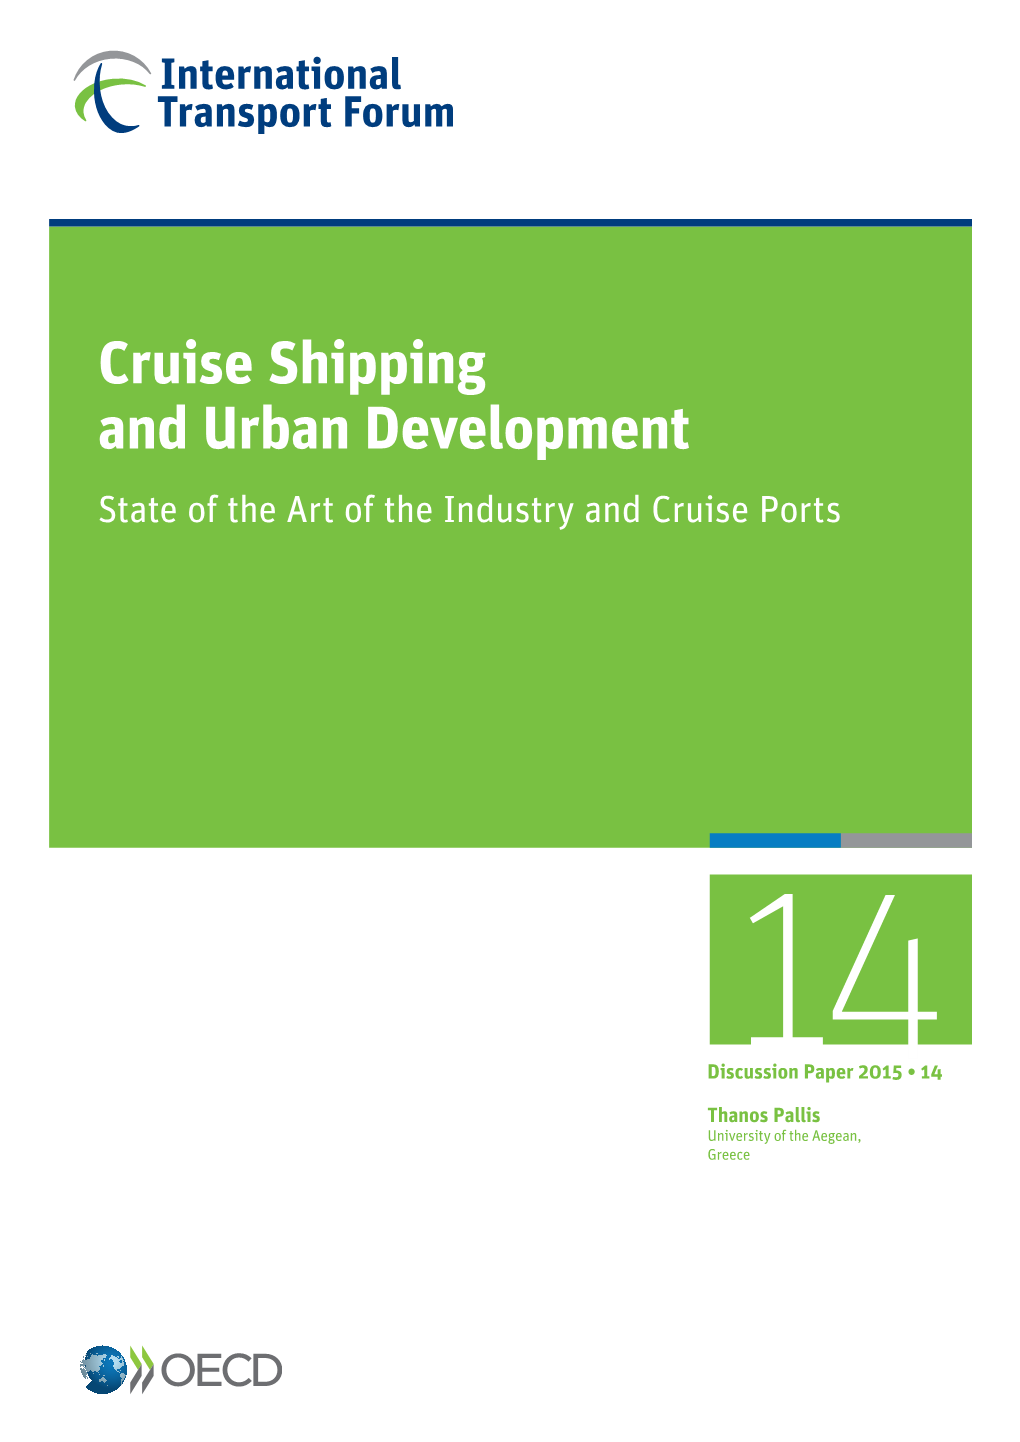 Cruise Shipping and Urban Development State of the Art of the Industry and Cruise Ports